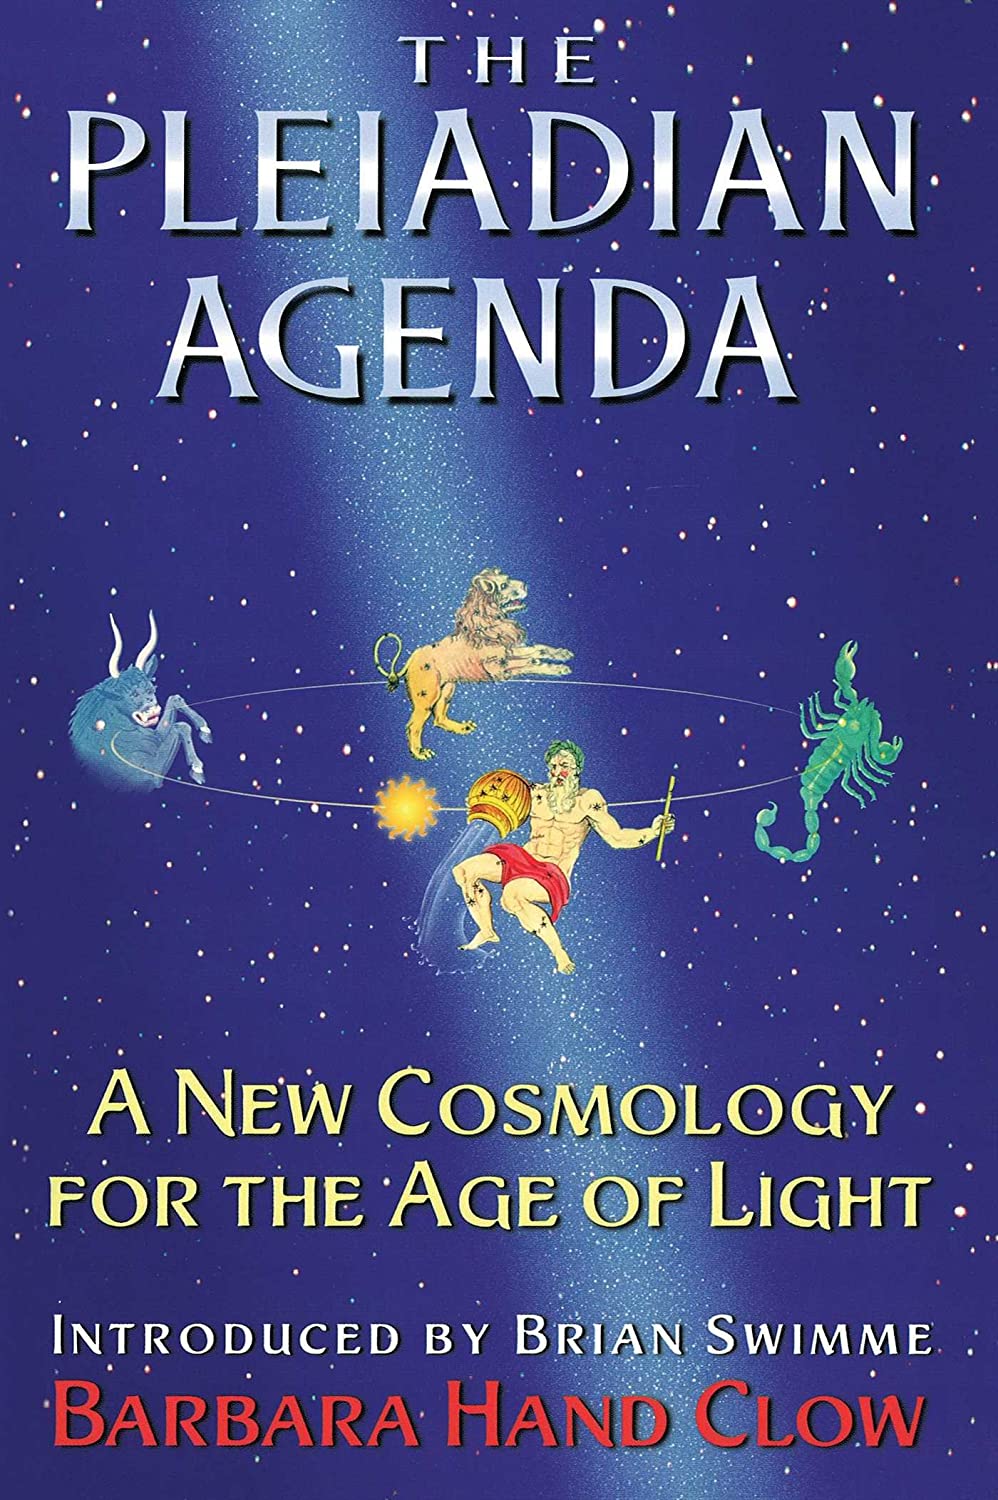 The Pleiadian Agenda; A New Cosmology for the Age of Light; Barbara Hand Clow